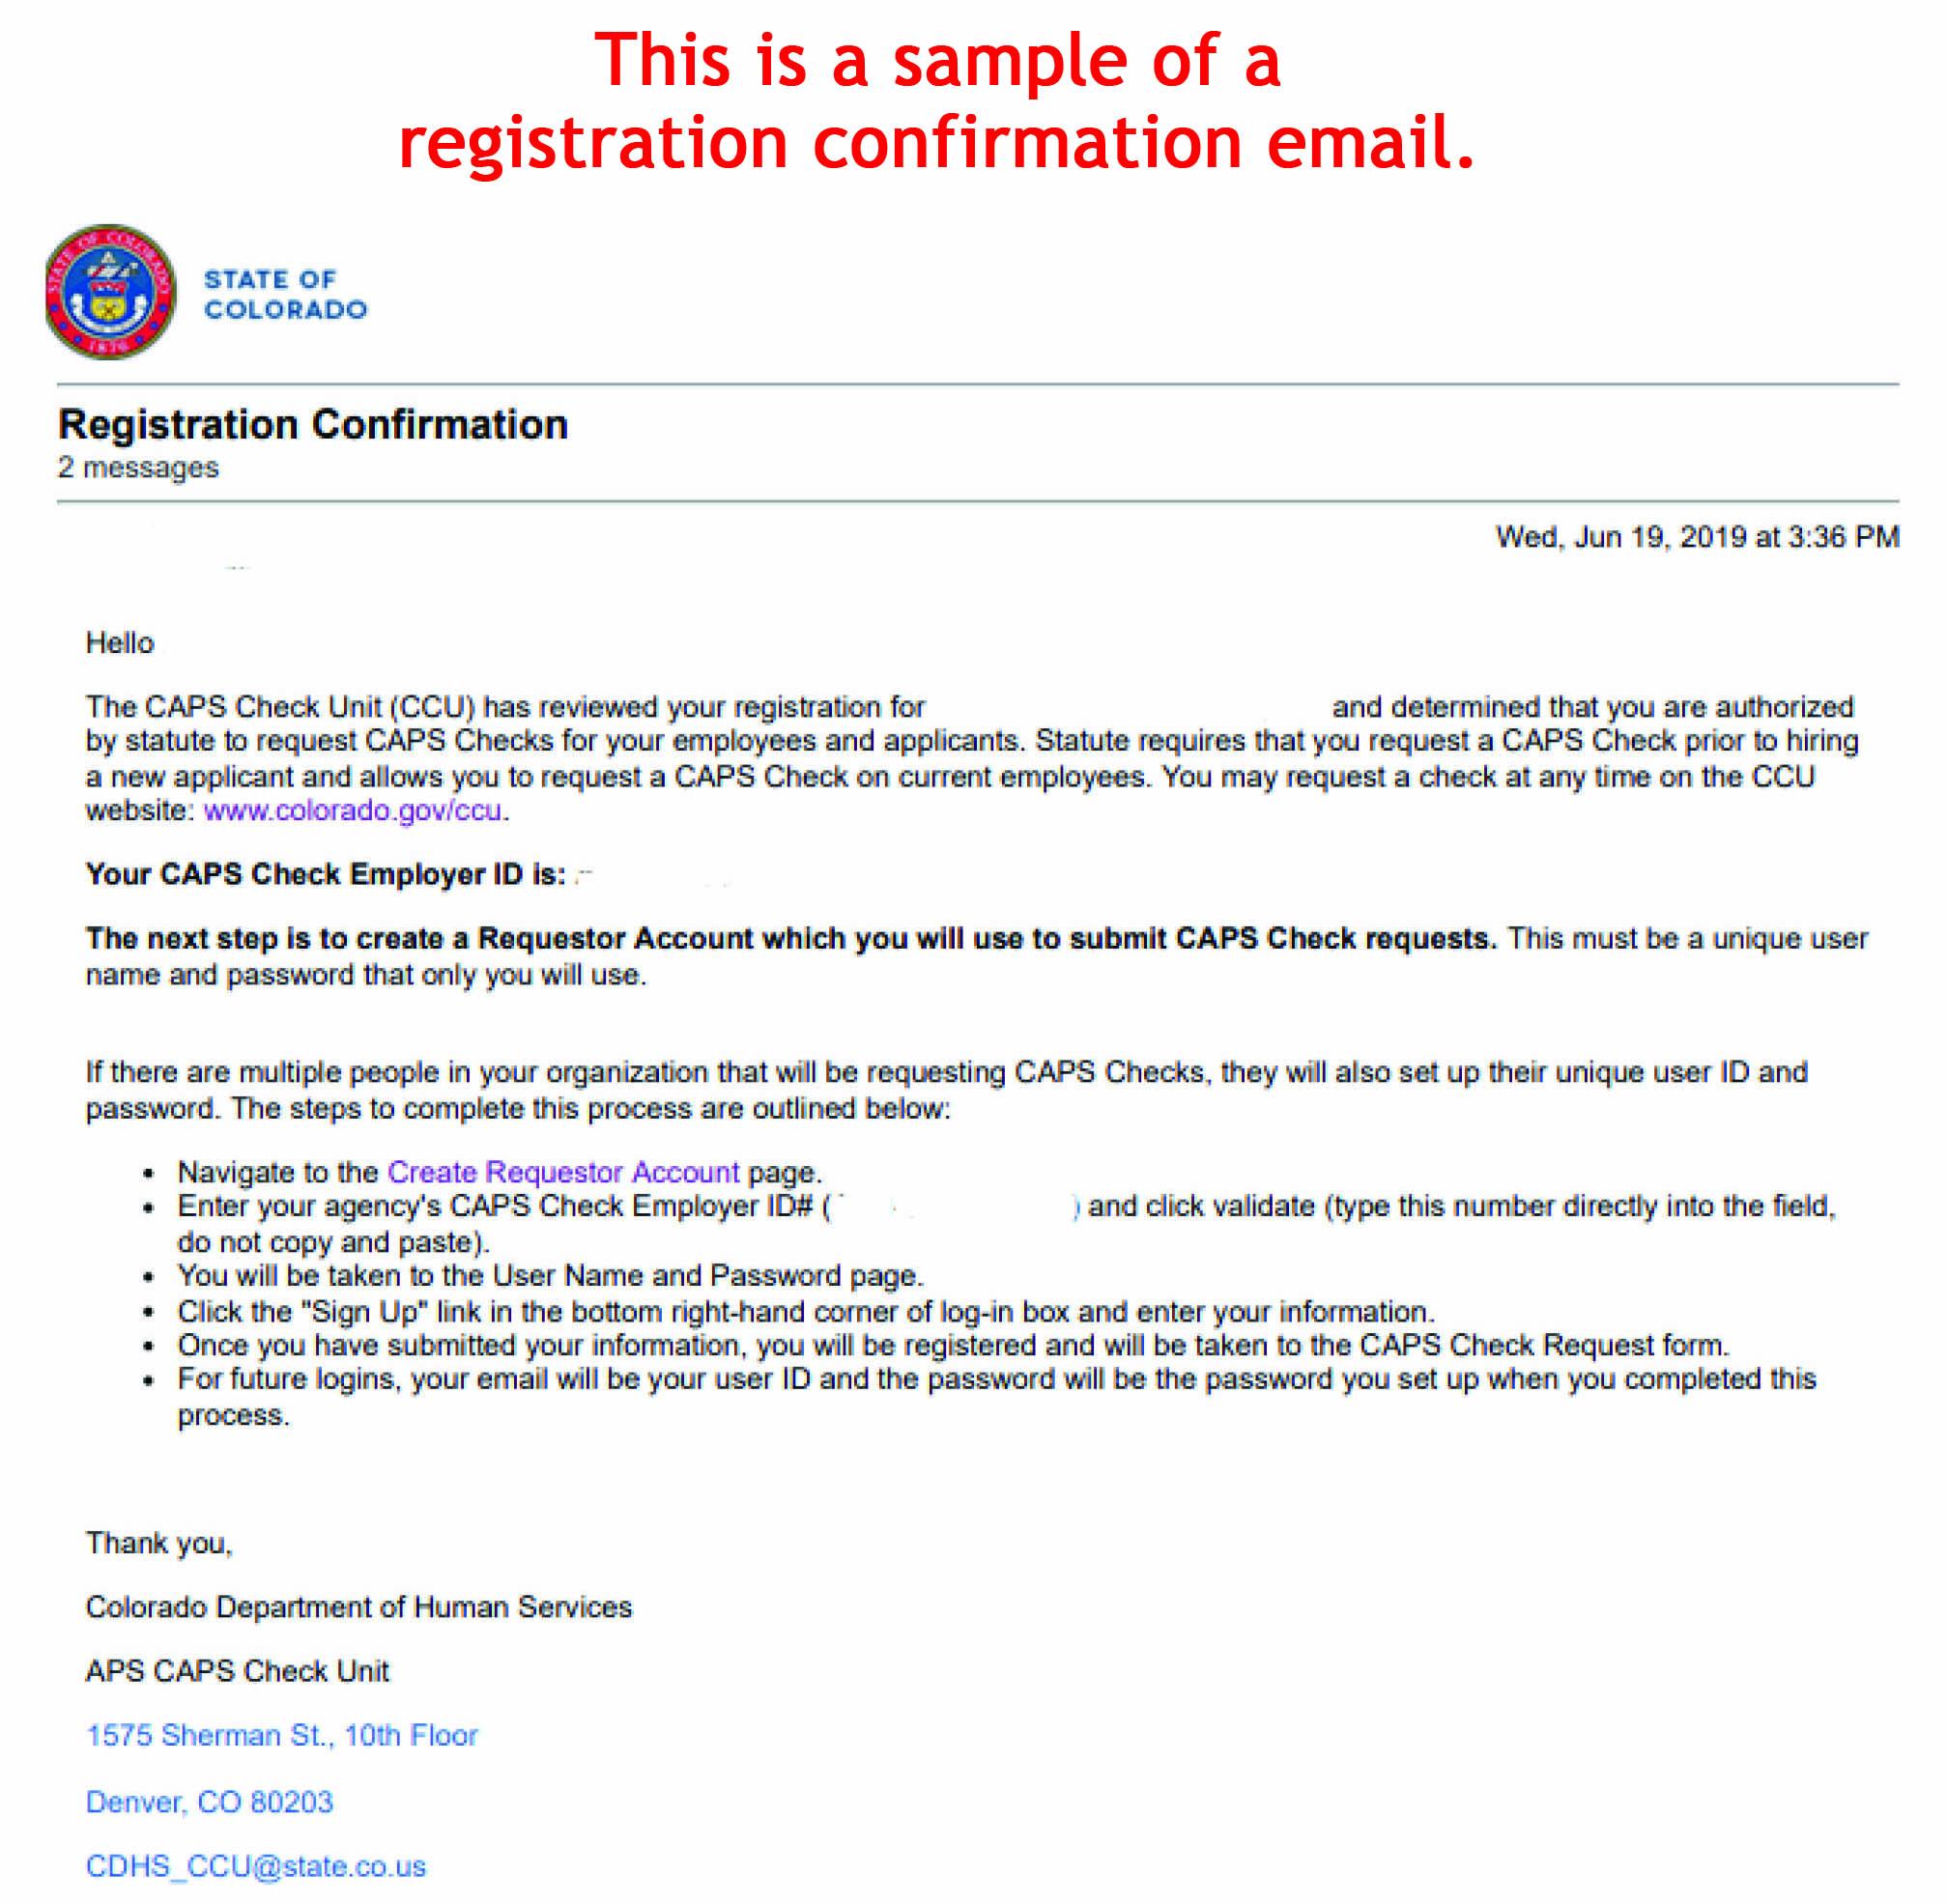 Sample email showing CCU registration confirmation